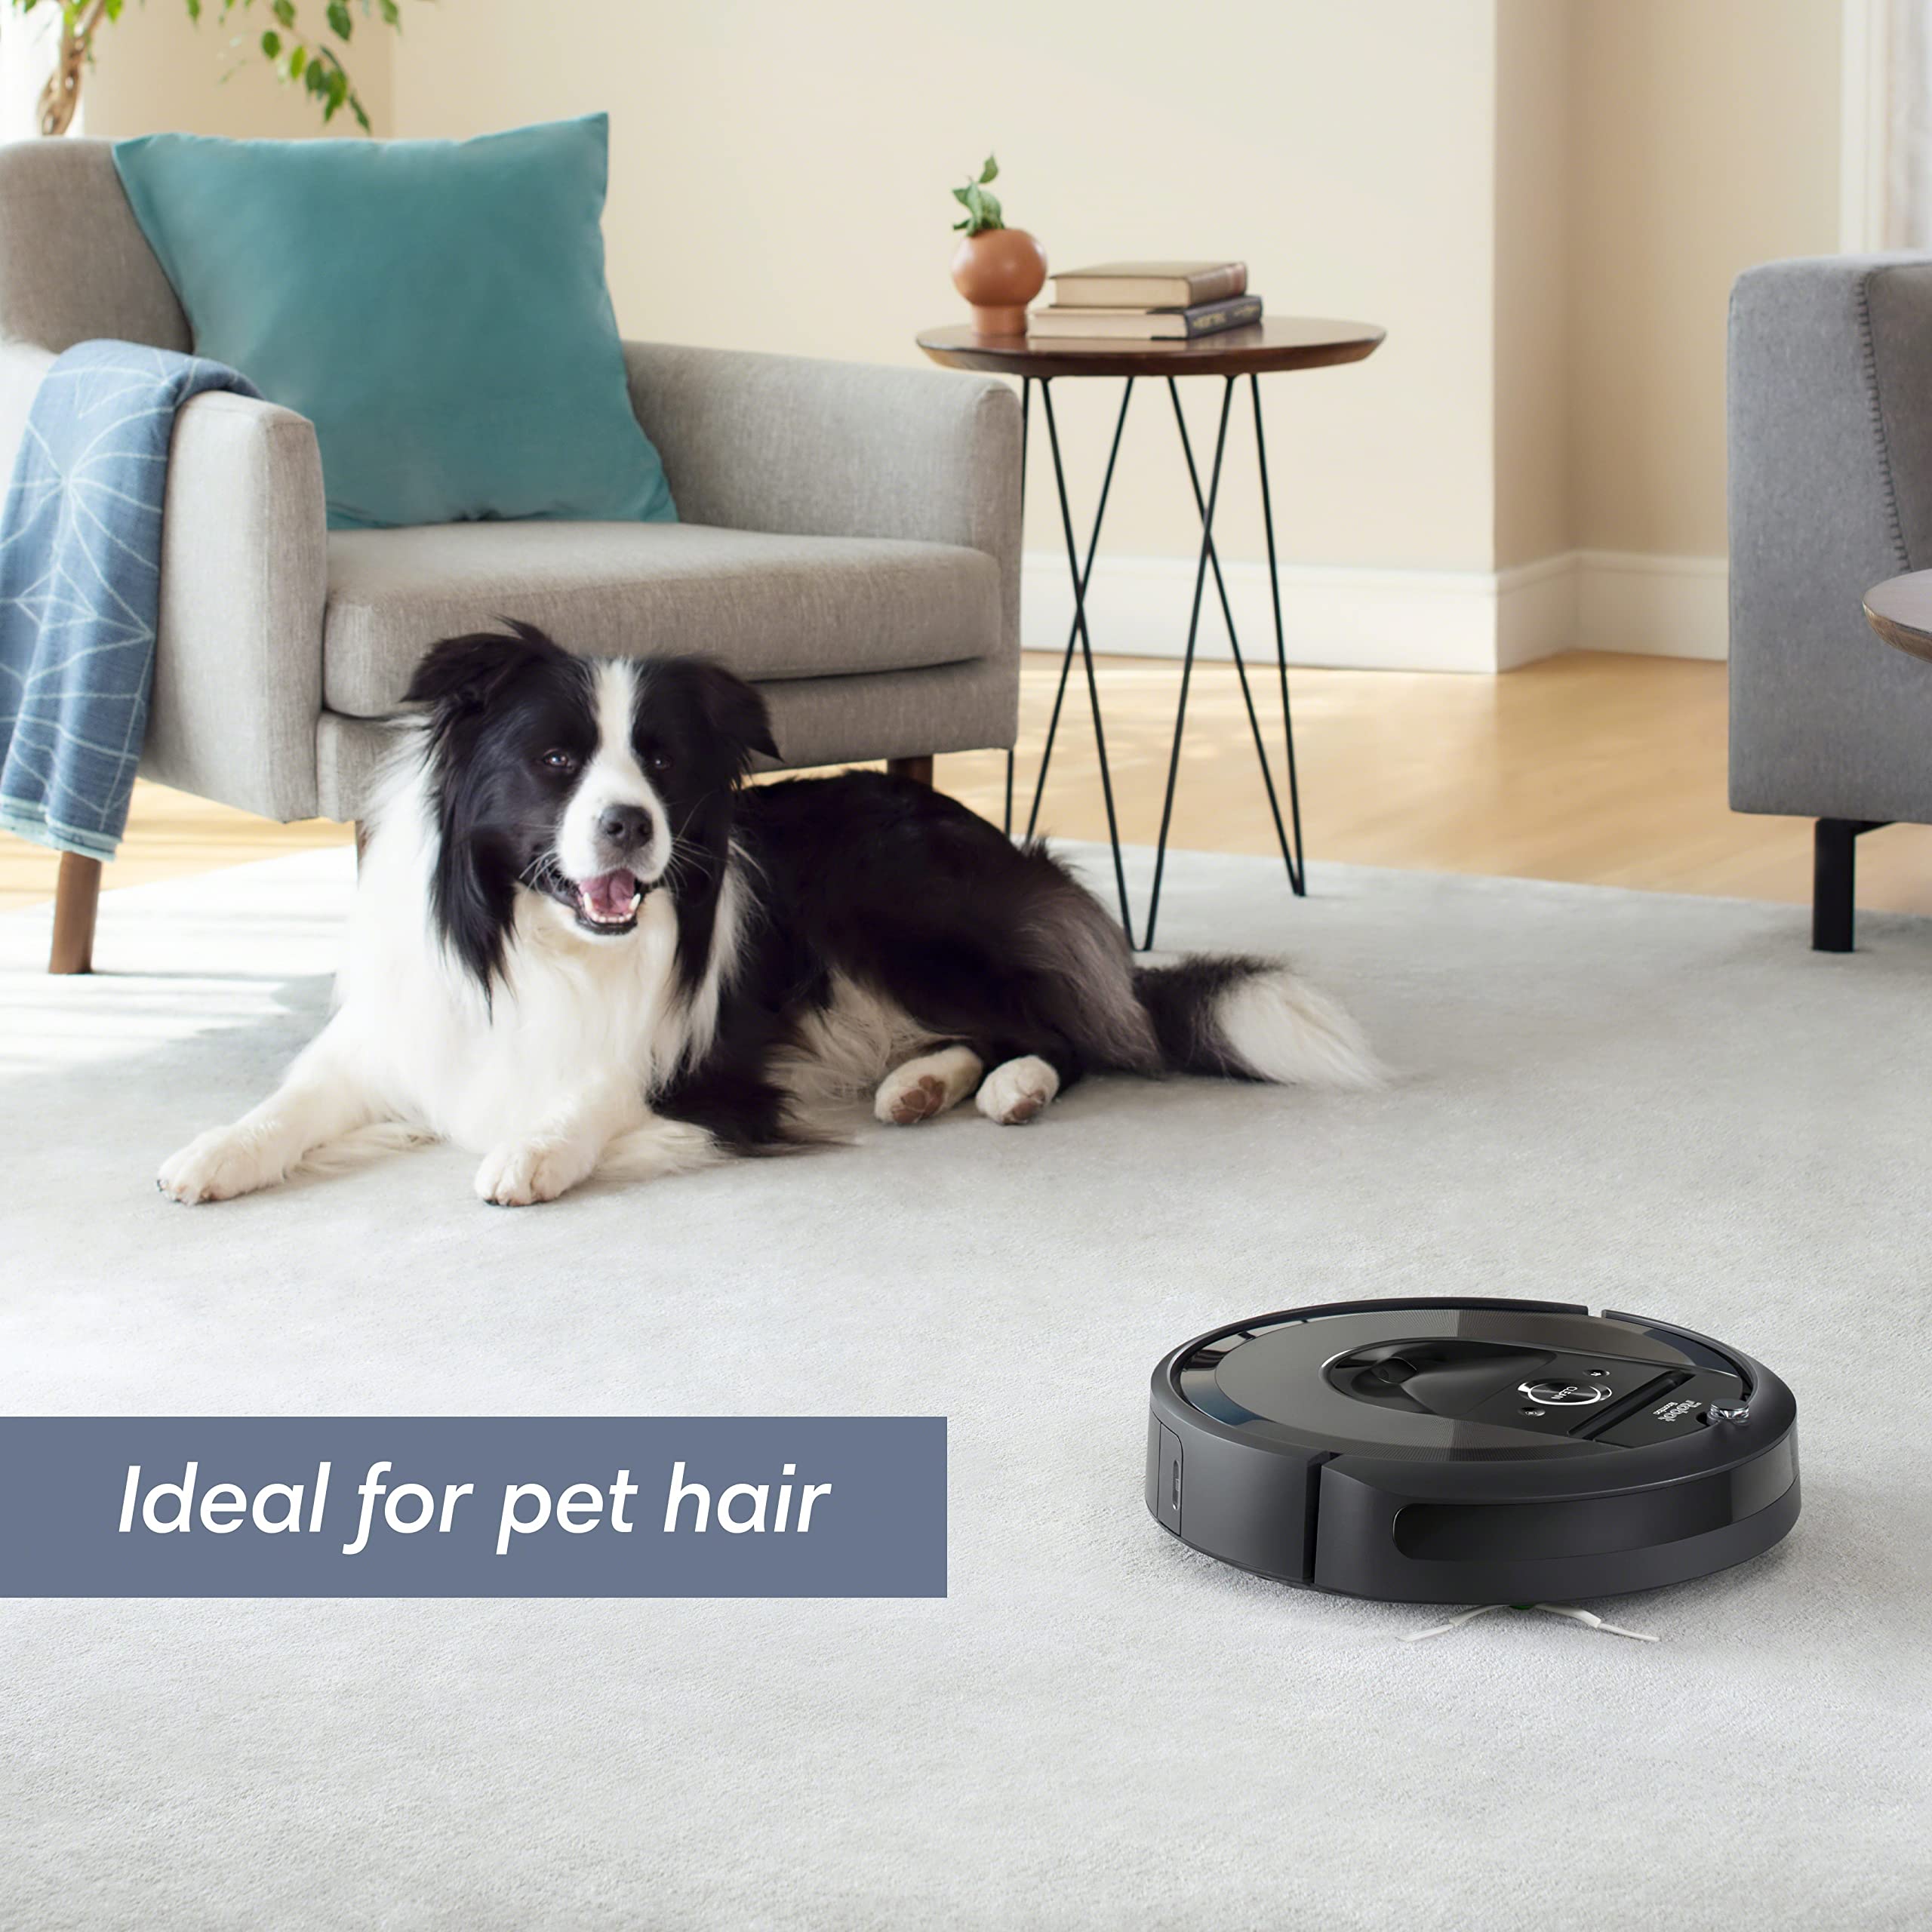 iRobot Roomba i7 (7150) Robot Vacuum- Wi-Fi Connected, Smart Mapping, Works with Alexa, Ideal for Pet Hair, Works with Clean Base